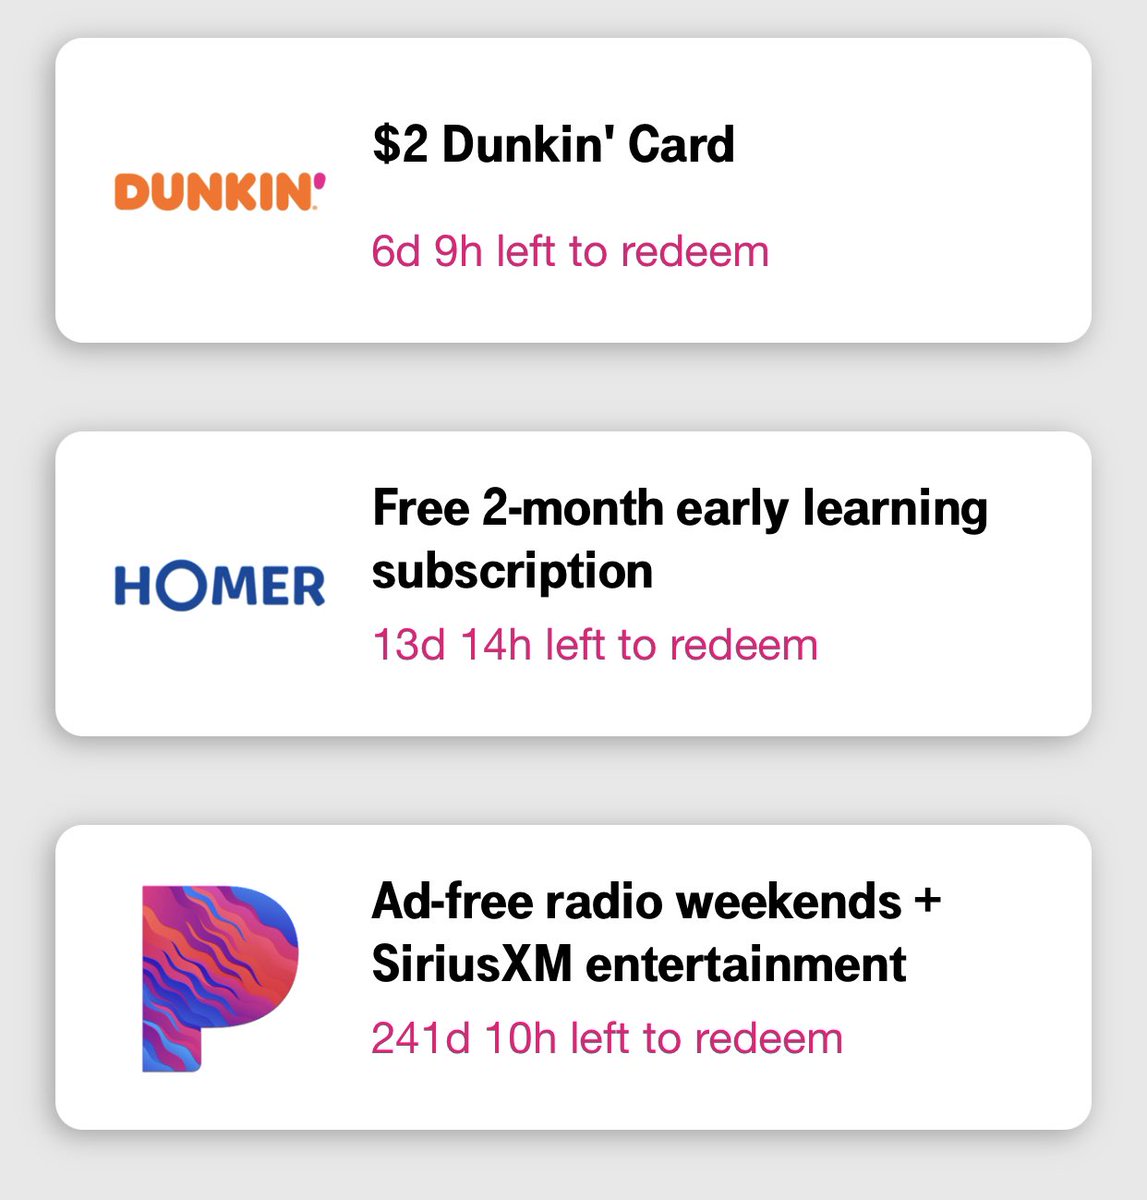 Yaasssss @TMobile I’m definitely getting my Dunkin coffee tomorrow 👌🏻💜 what about early learning for my daughter!!! Ufff great gifts for sure 👏🏻👏🏻👏🏻👏🏻